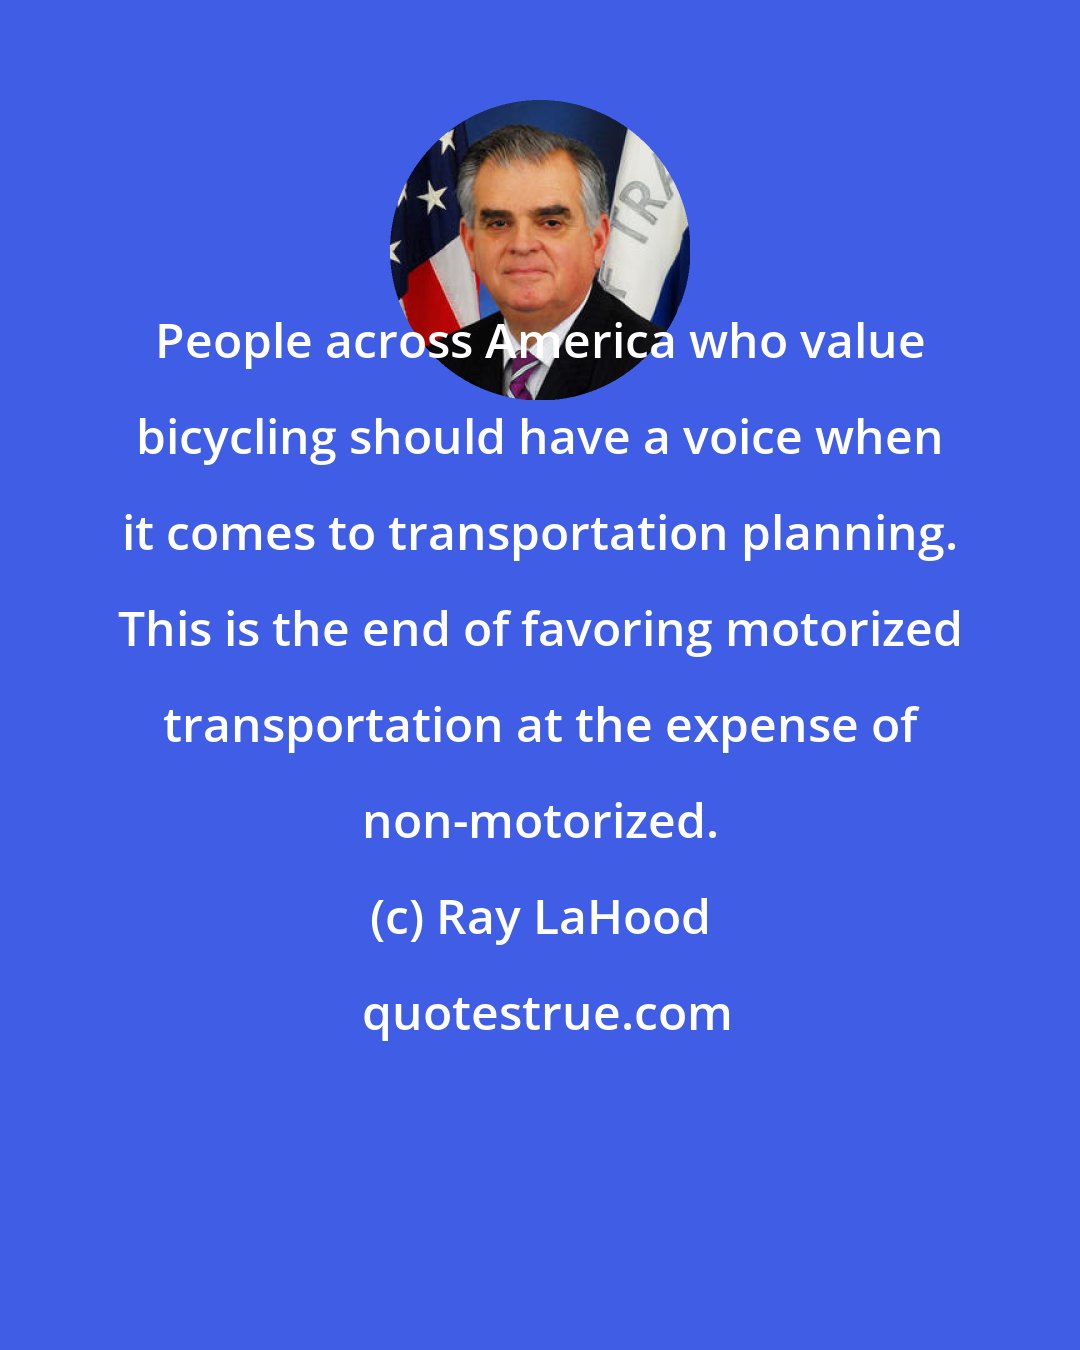 Ray LaHood: People across America who value bicycling should have a voice when it comes to transportation planning. This is the end of favoring motorized transportation at the expense of non-motorized.